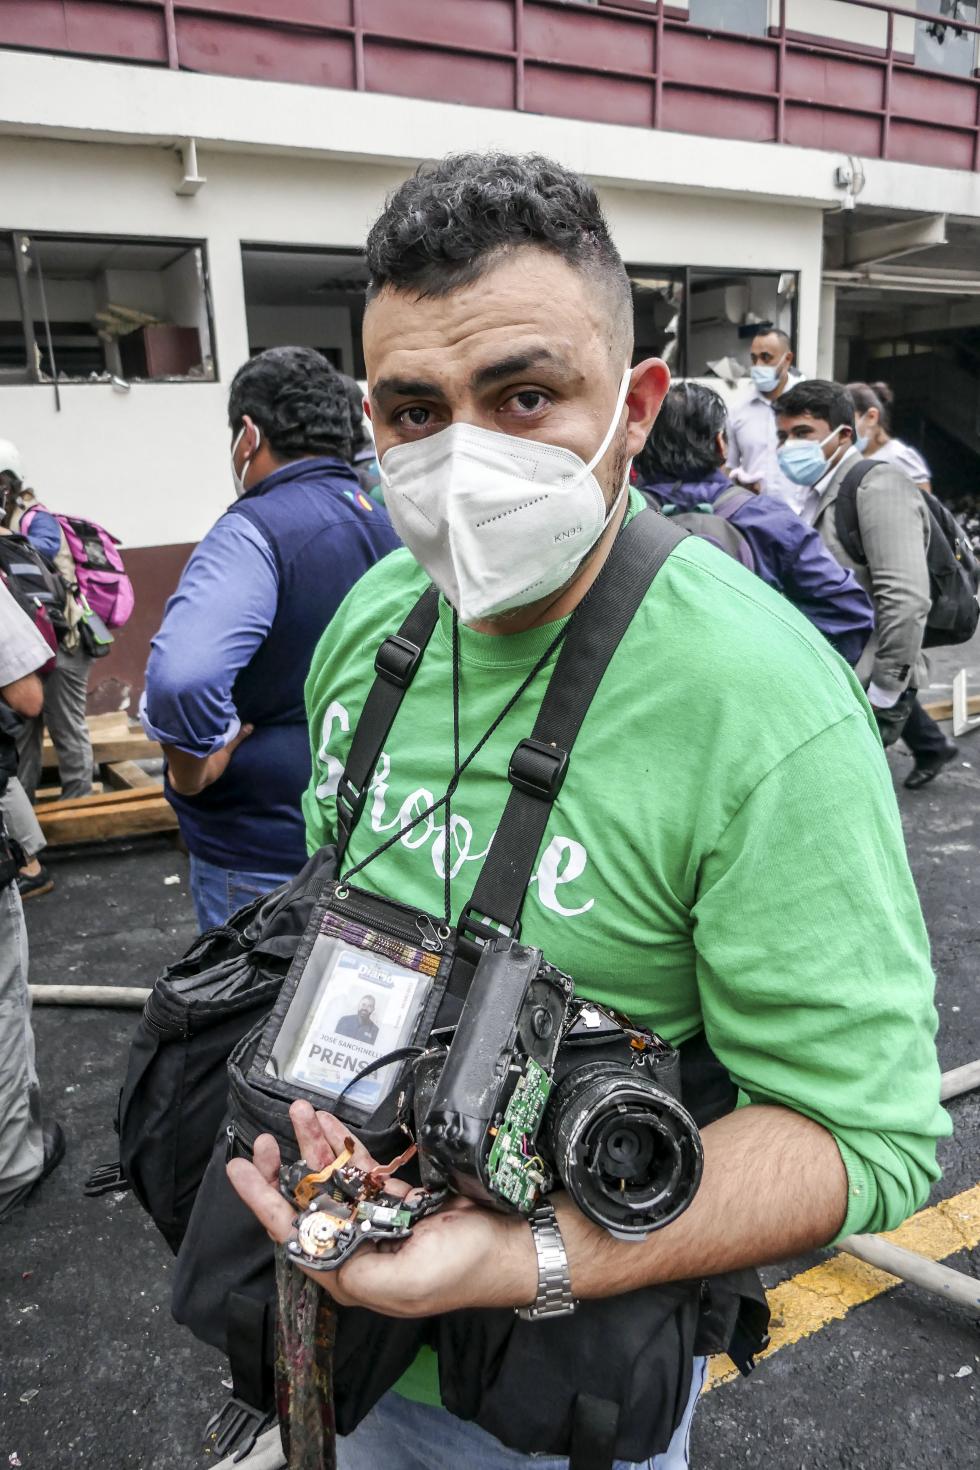 José Sanchinelli reporter from a local newspaper was attacked during the riots of Hundreds of former civilian patrol elements burned part of the Congress building during demanding a financial compensation. On October 19, 2021 in Guatemala City, Guatemala. 